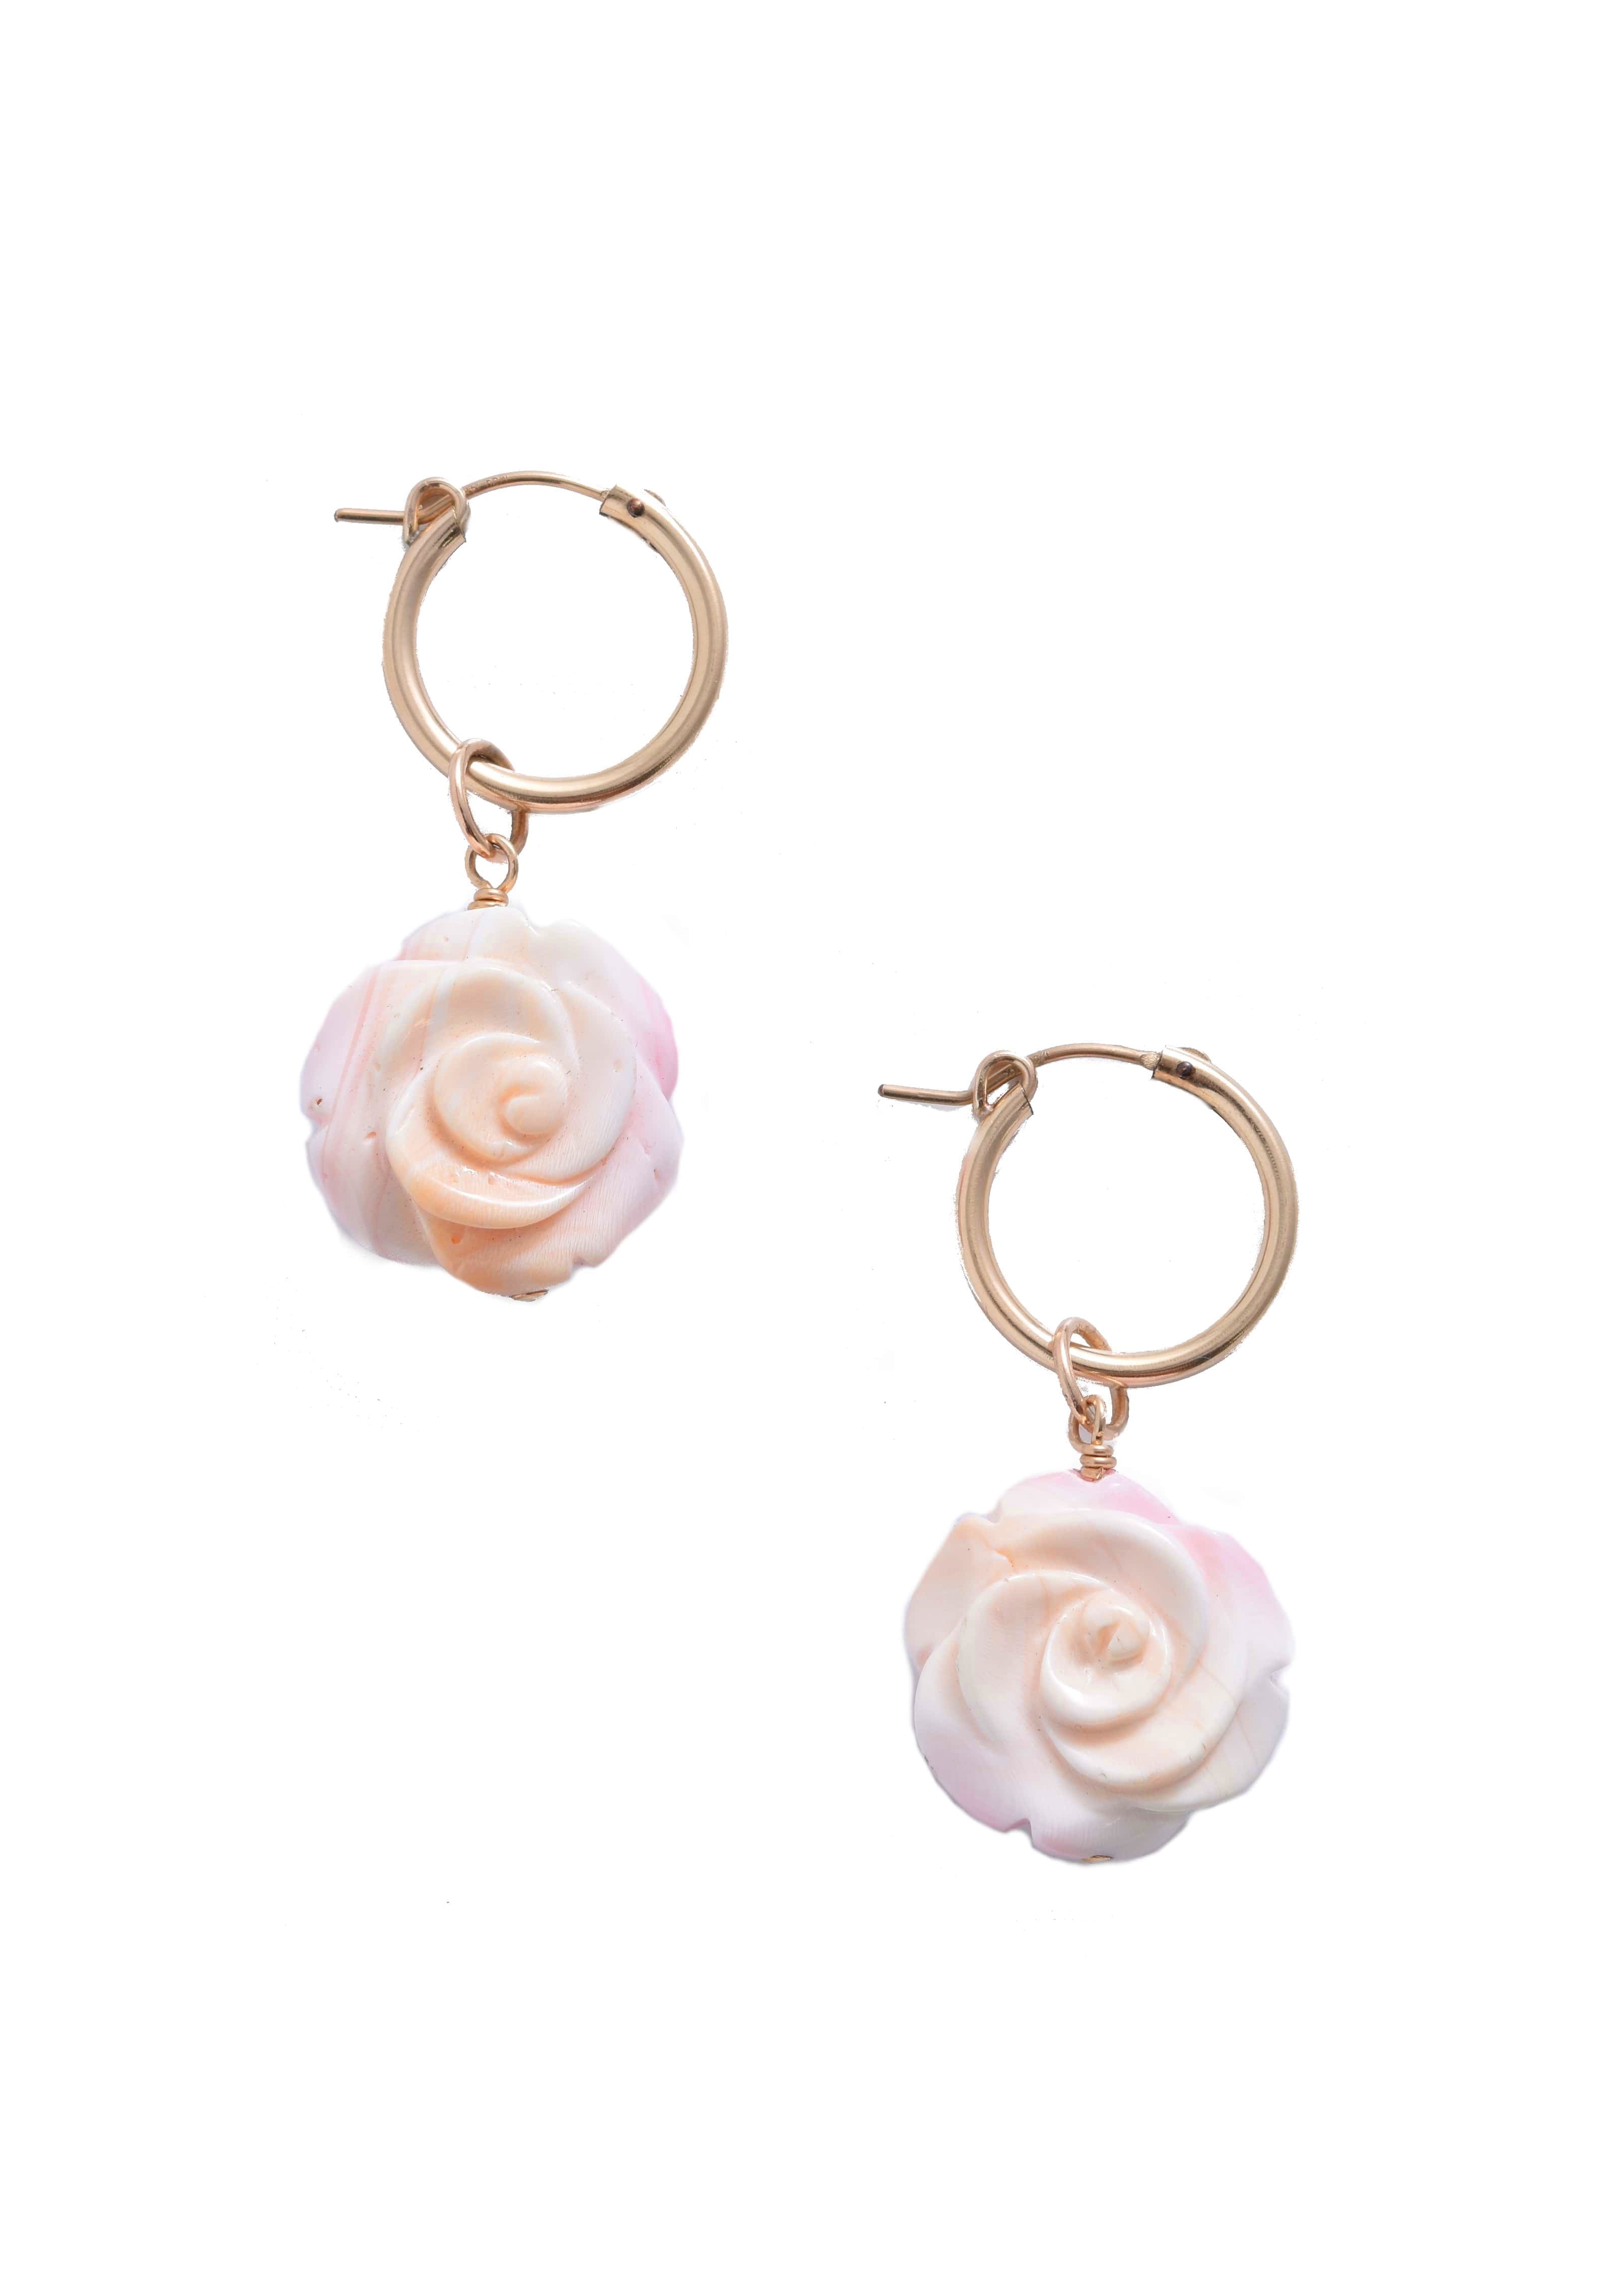 Carved Rose Charm in Pink Conch